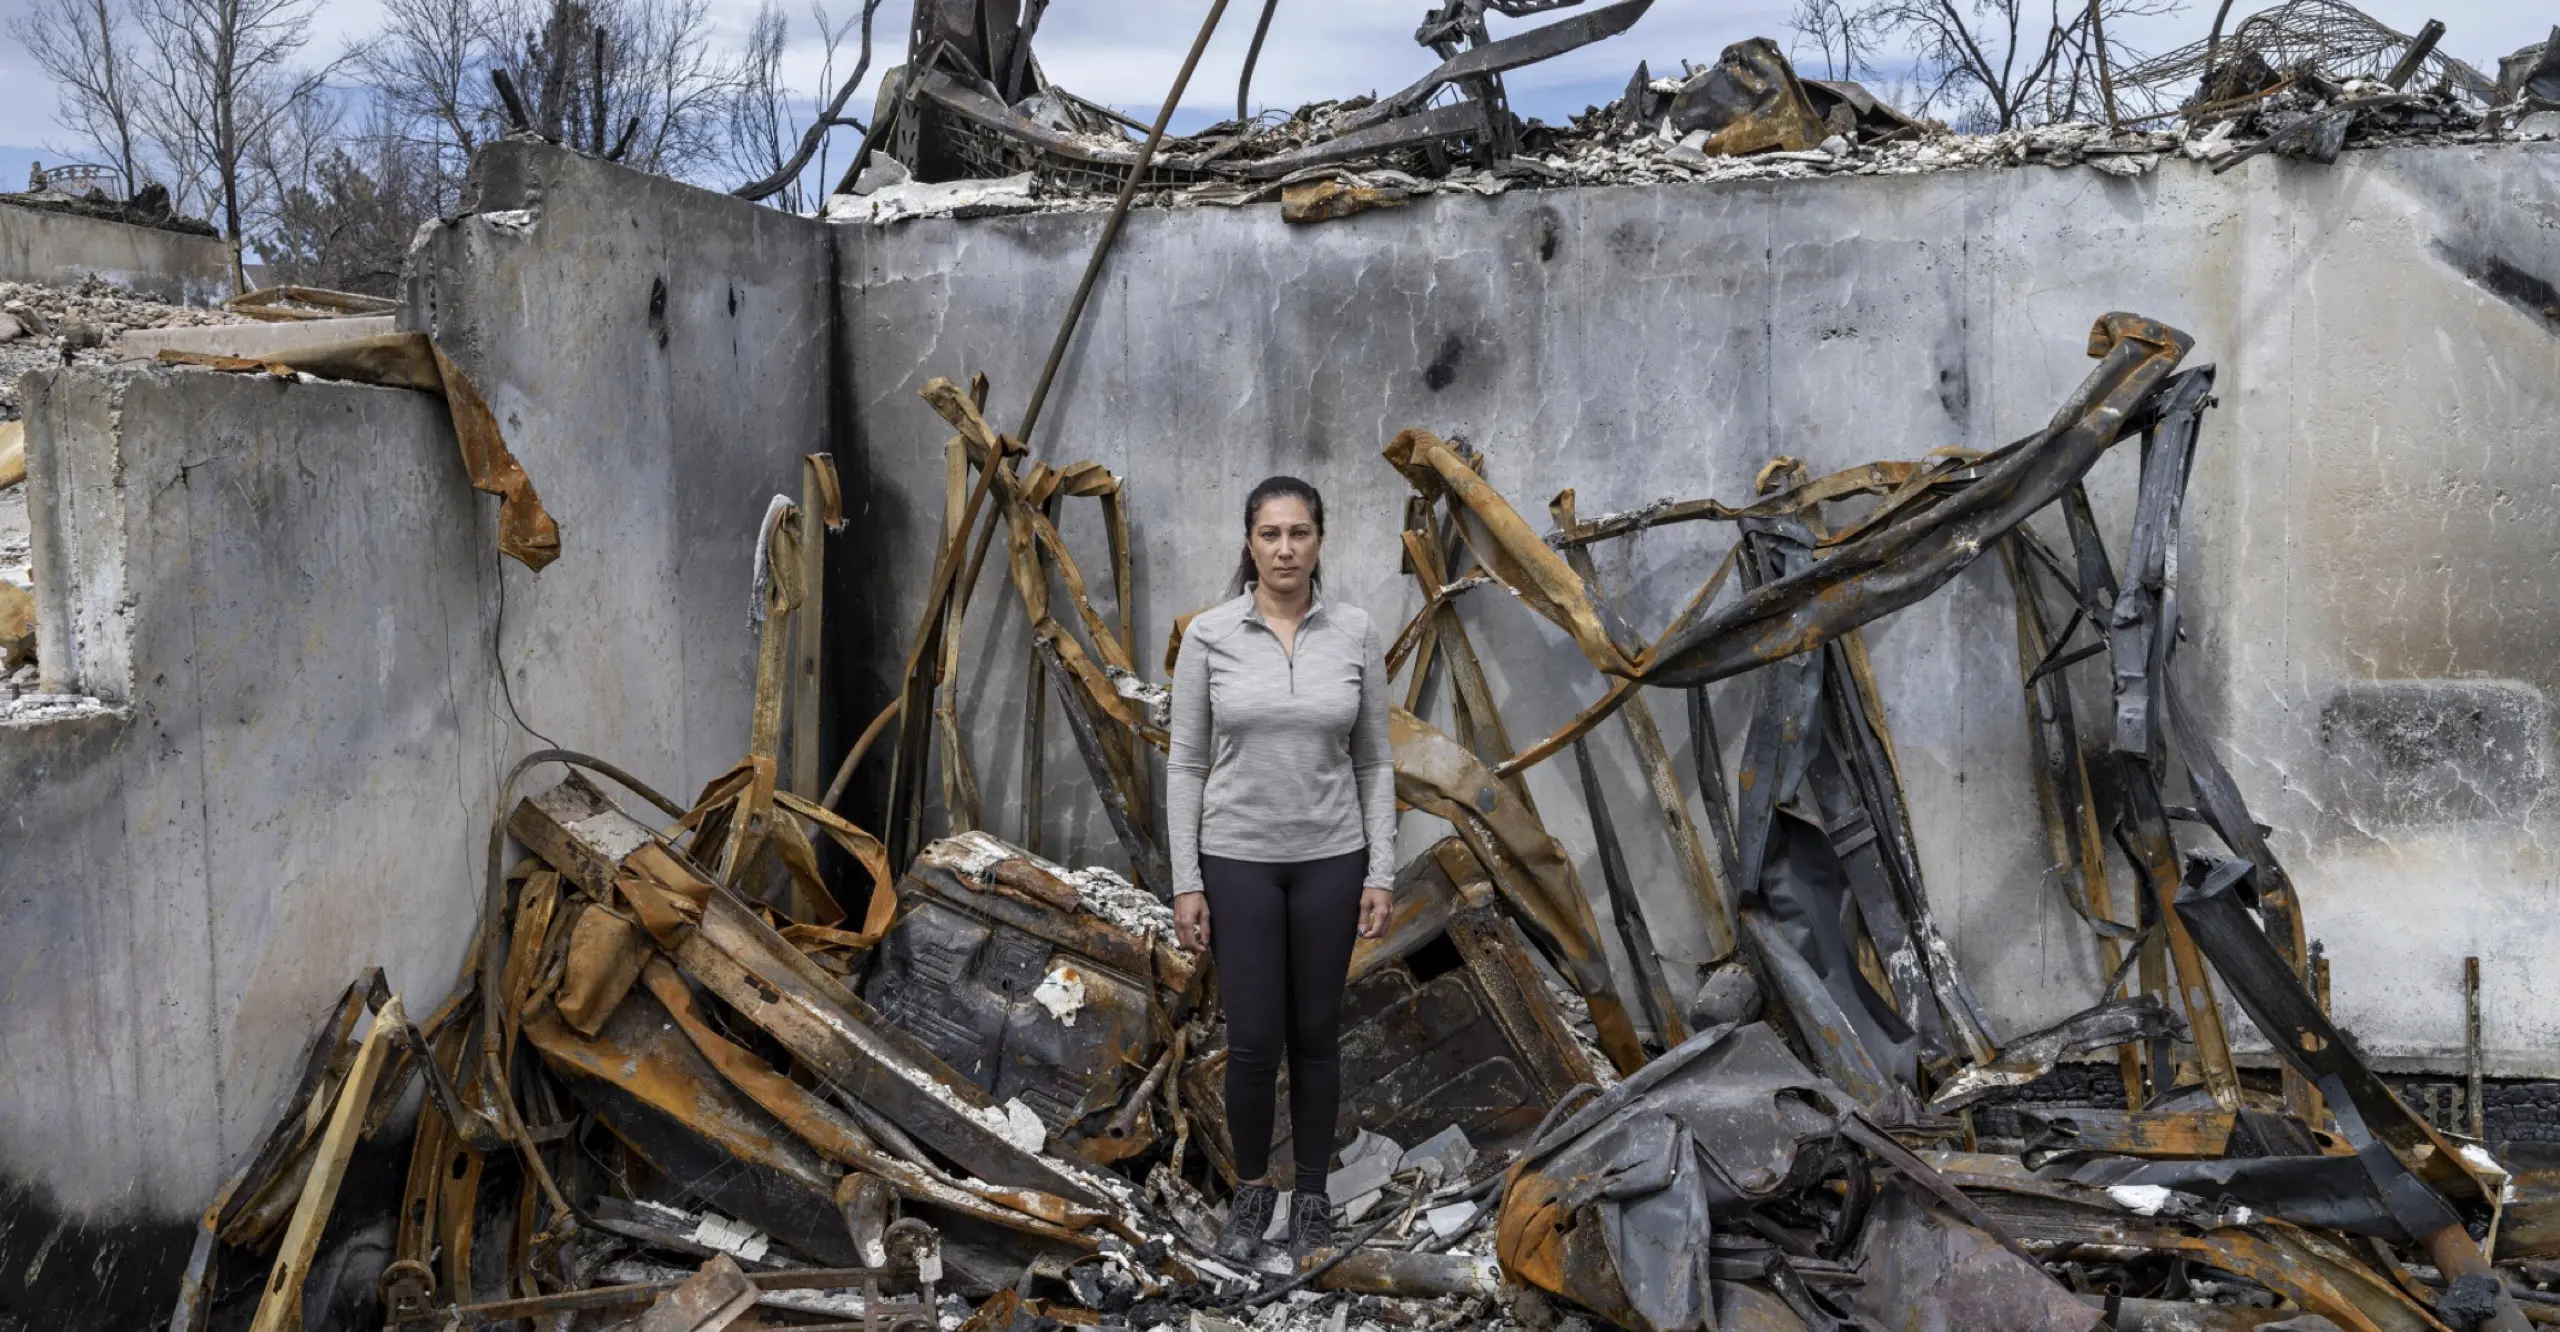 Colour photograph featuring a female presenting person standing in the ruins of a home destroyed by fire